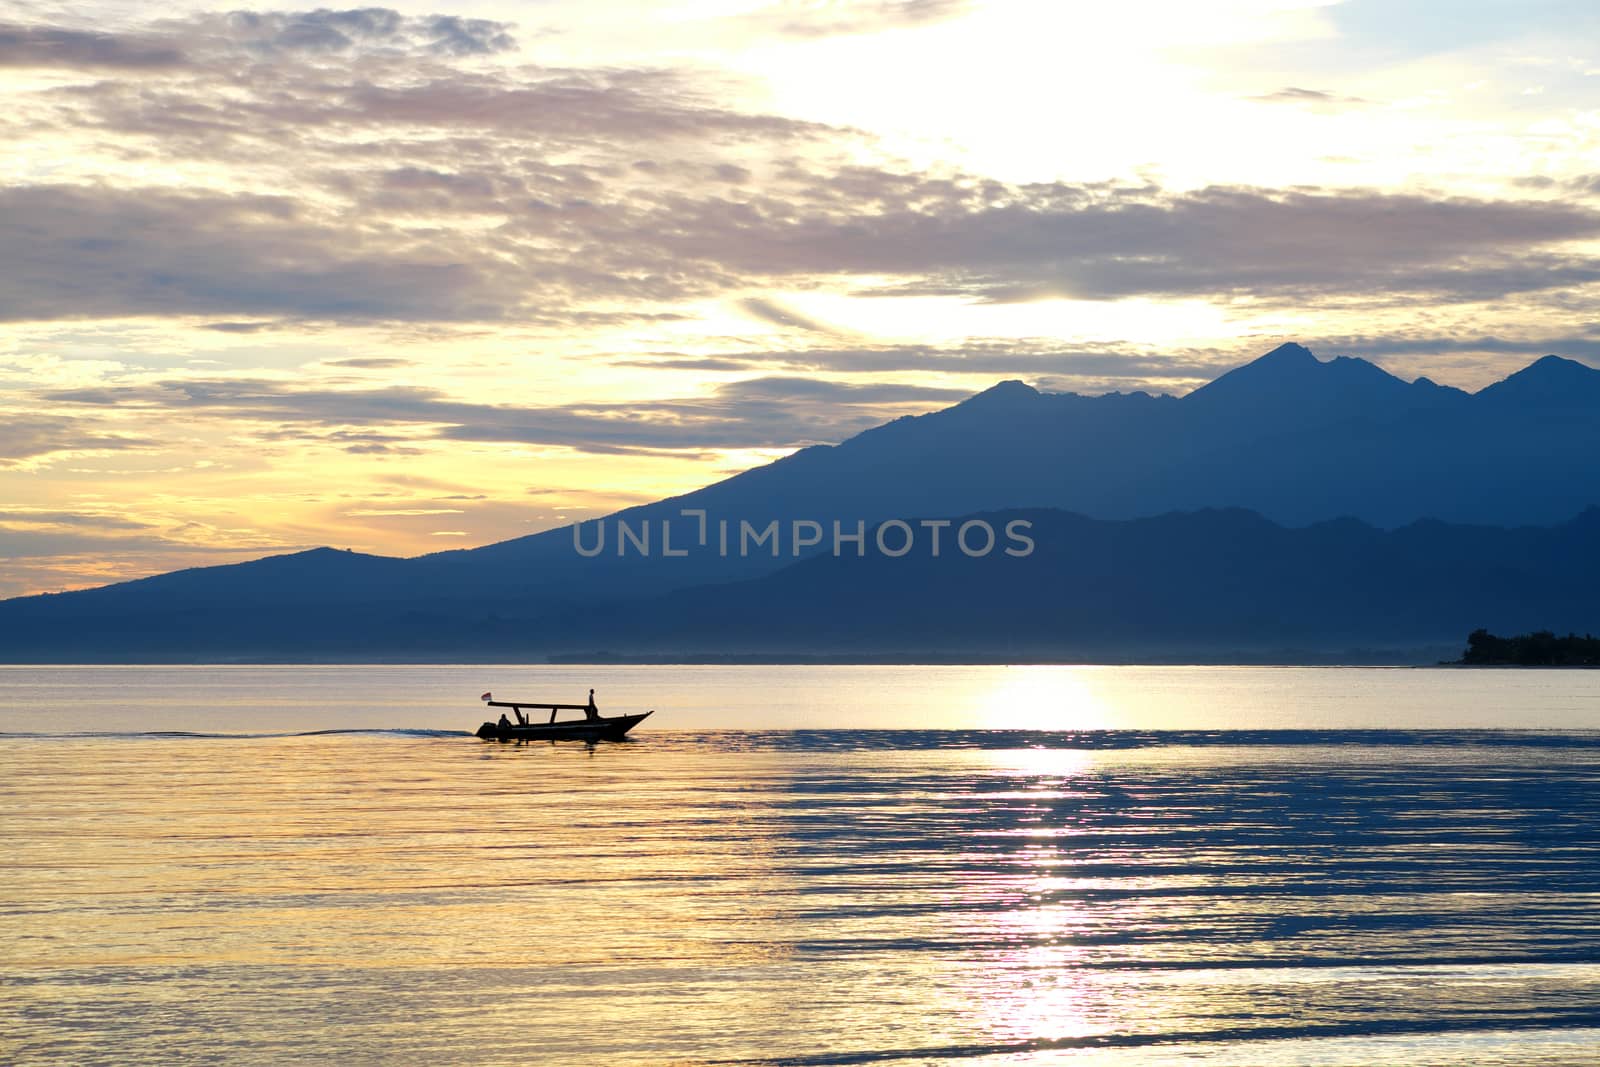 Boat with lombok volcano Rinjani in the background before the sunrise by rainfallsup